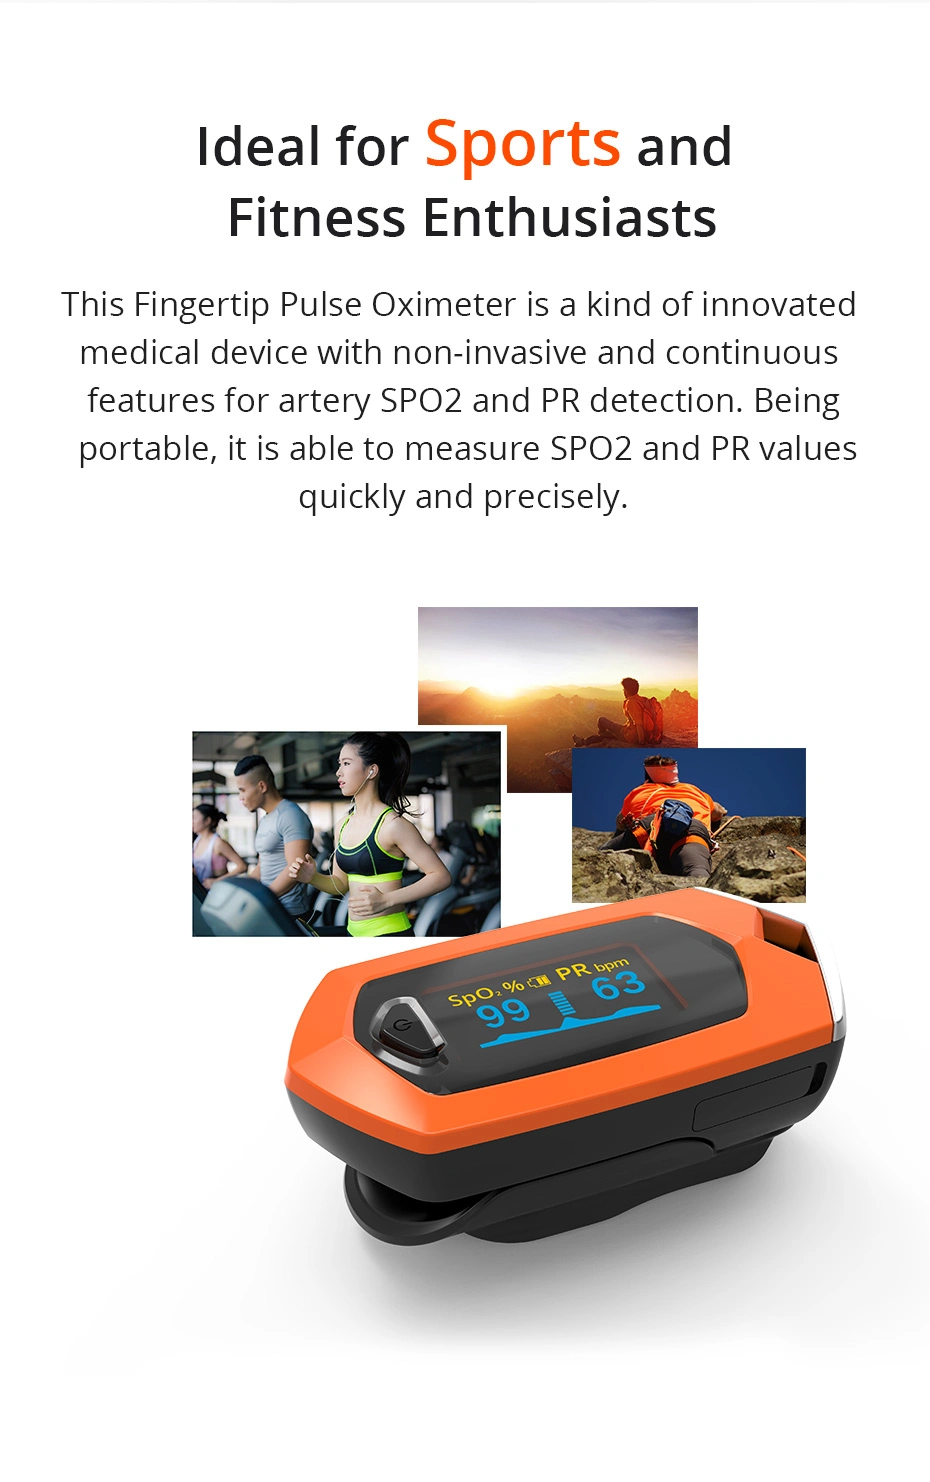 Hot Sale Hospital Products Medcial Equipment Patient Non-Invasive Pulse Oximeter (MSLXY15)